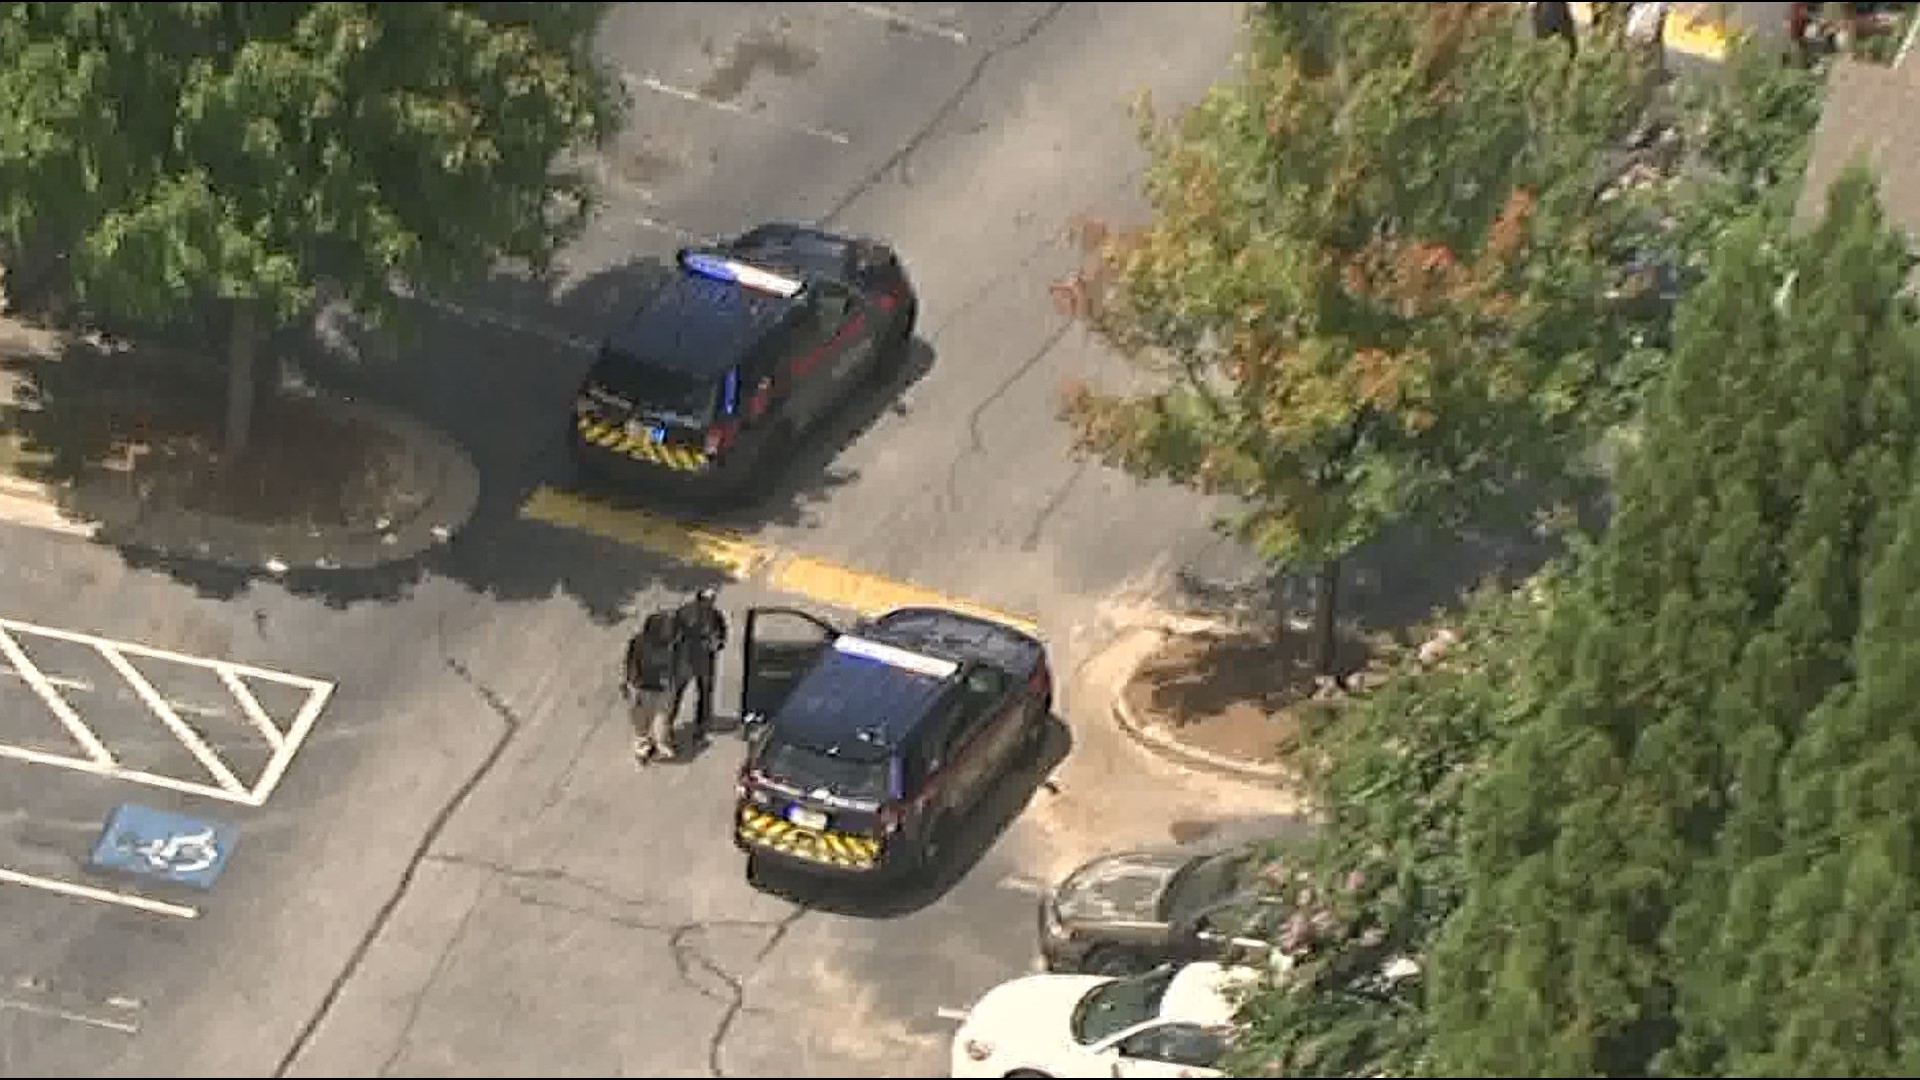 Atlanta Police roped off some of the parking lot with crime scene tape Thursday afternoon.